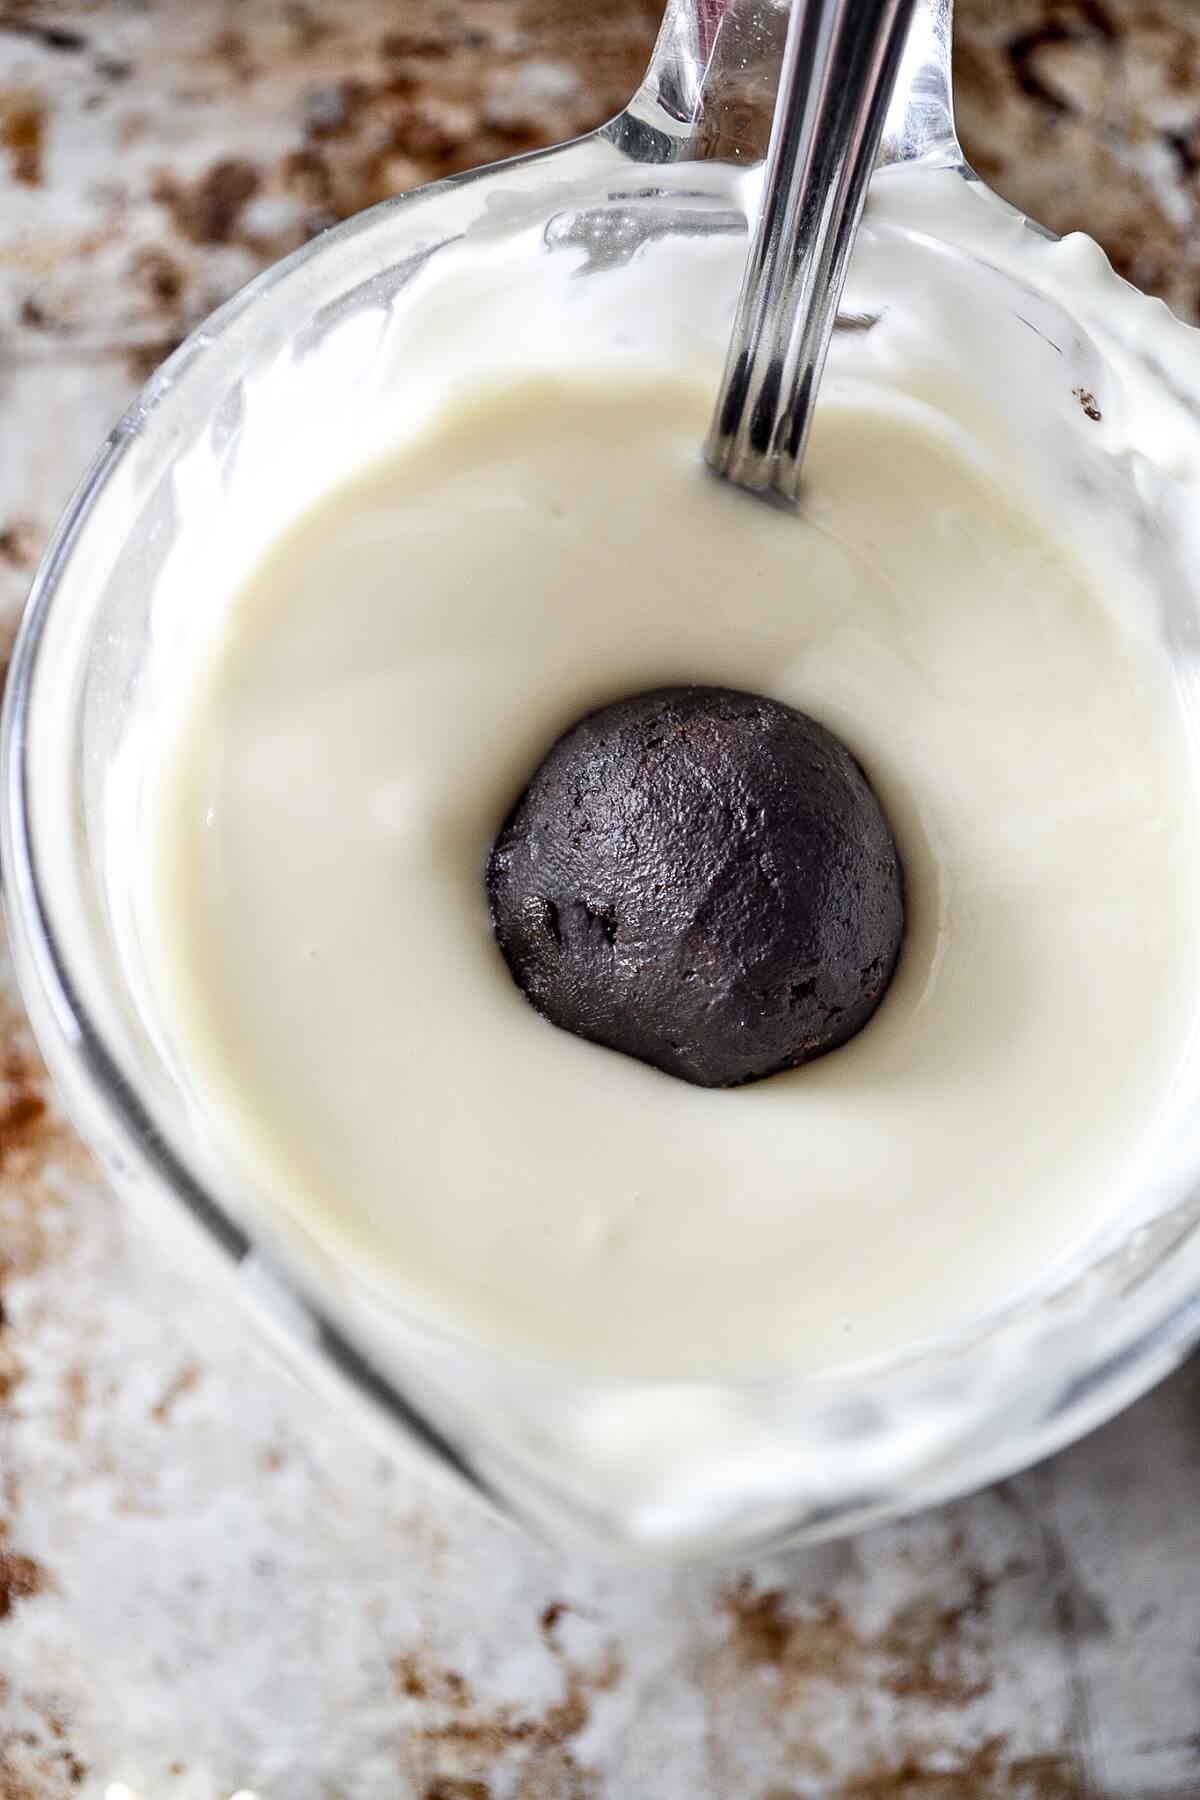 An oreo truffle ball being coated in melted white chocolate.